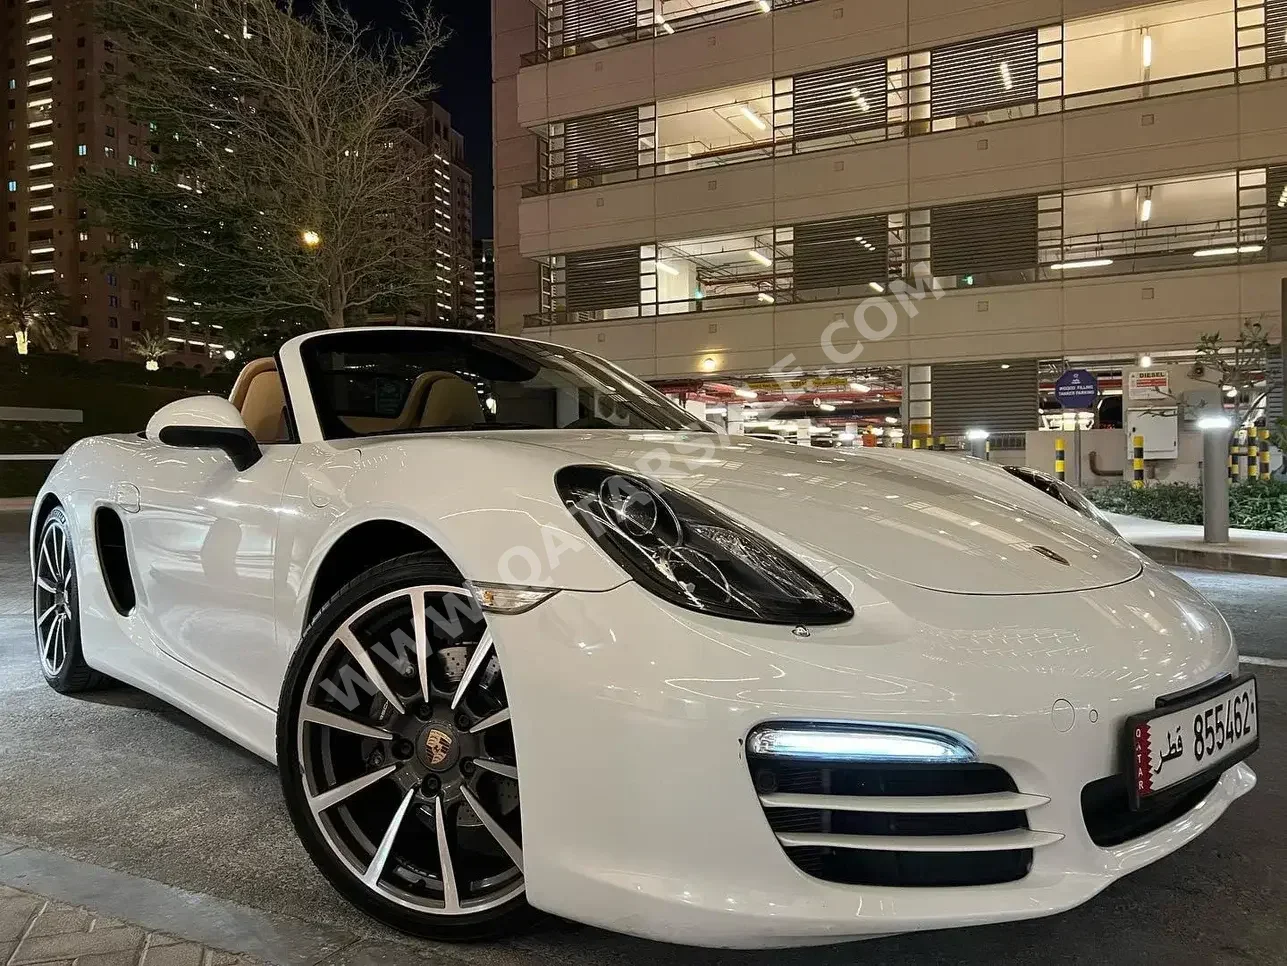 Porsche  Boxster  S  2013  Automatic  119,000 Km  6 Cylinder  Rear Wheel Drive (RWD)  Coupe / Sport  White